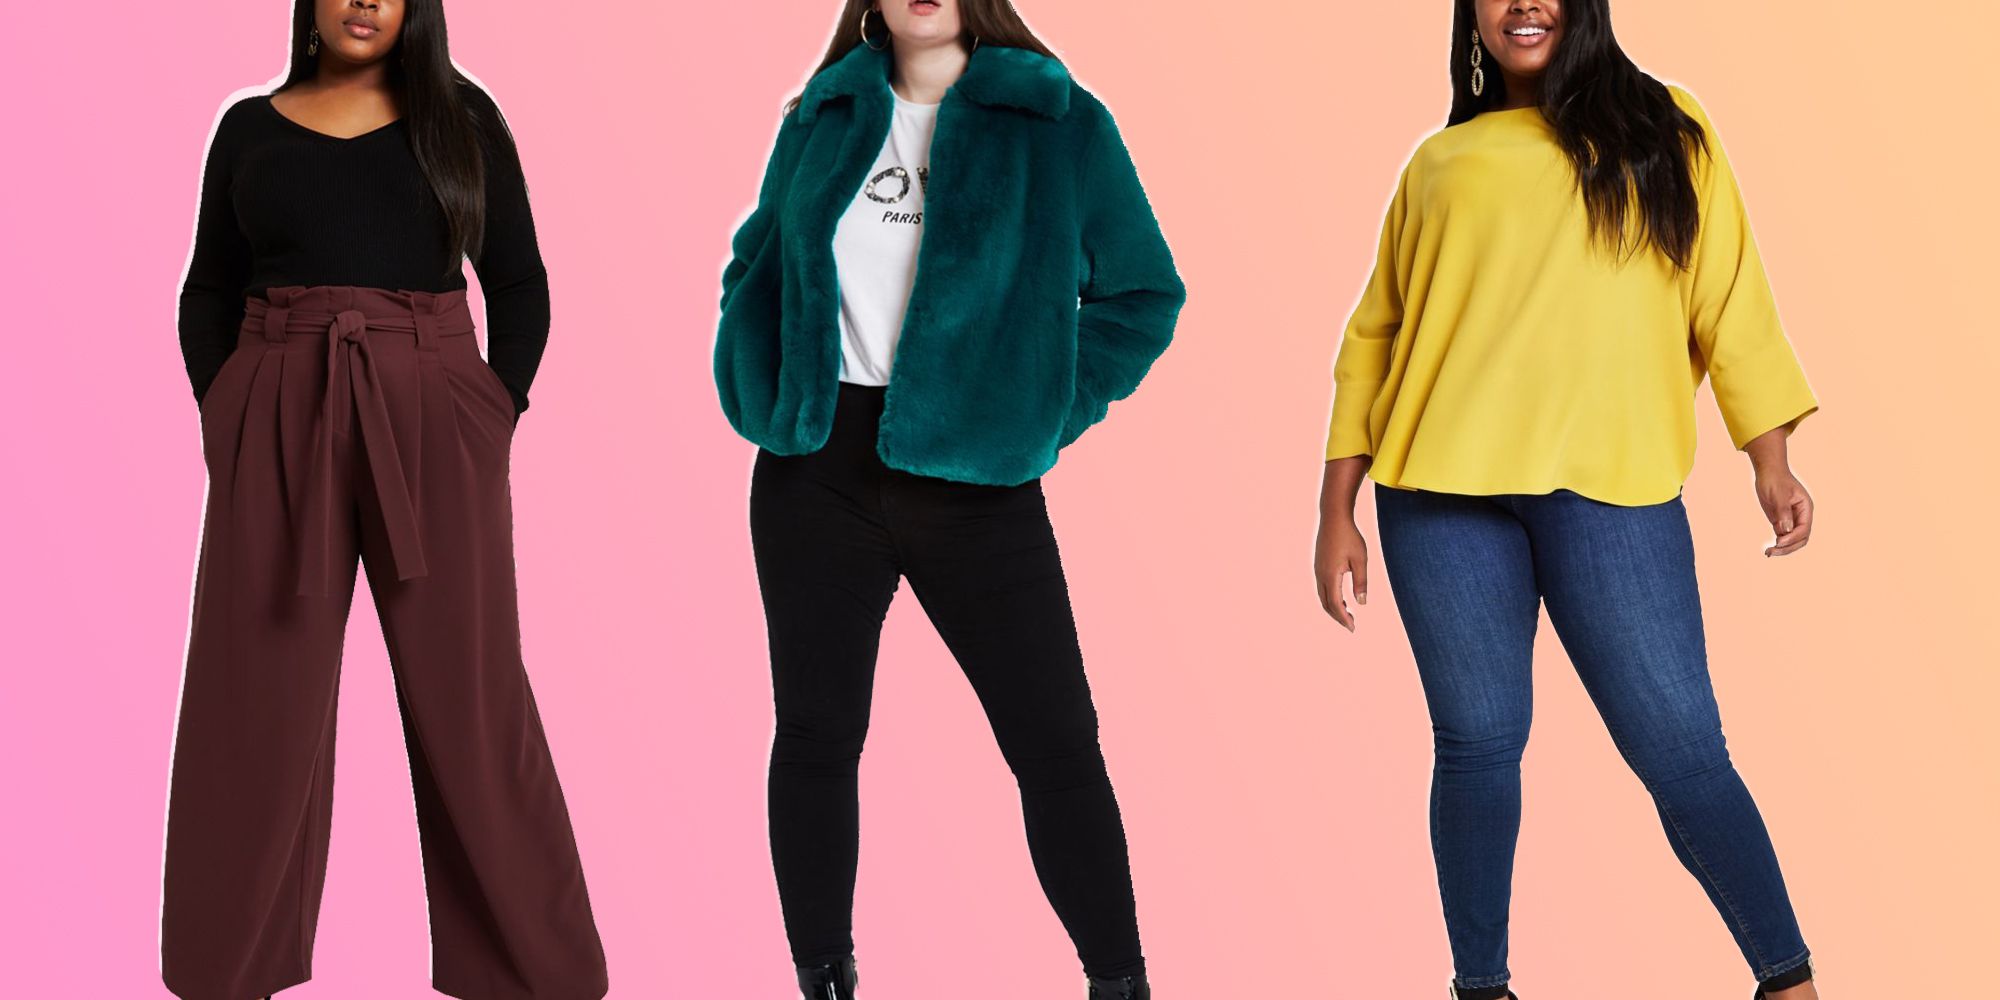 River Island has removed its plus-size clothing range from stores